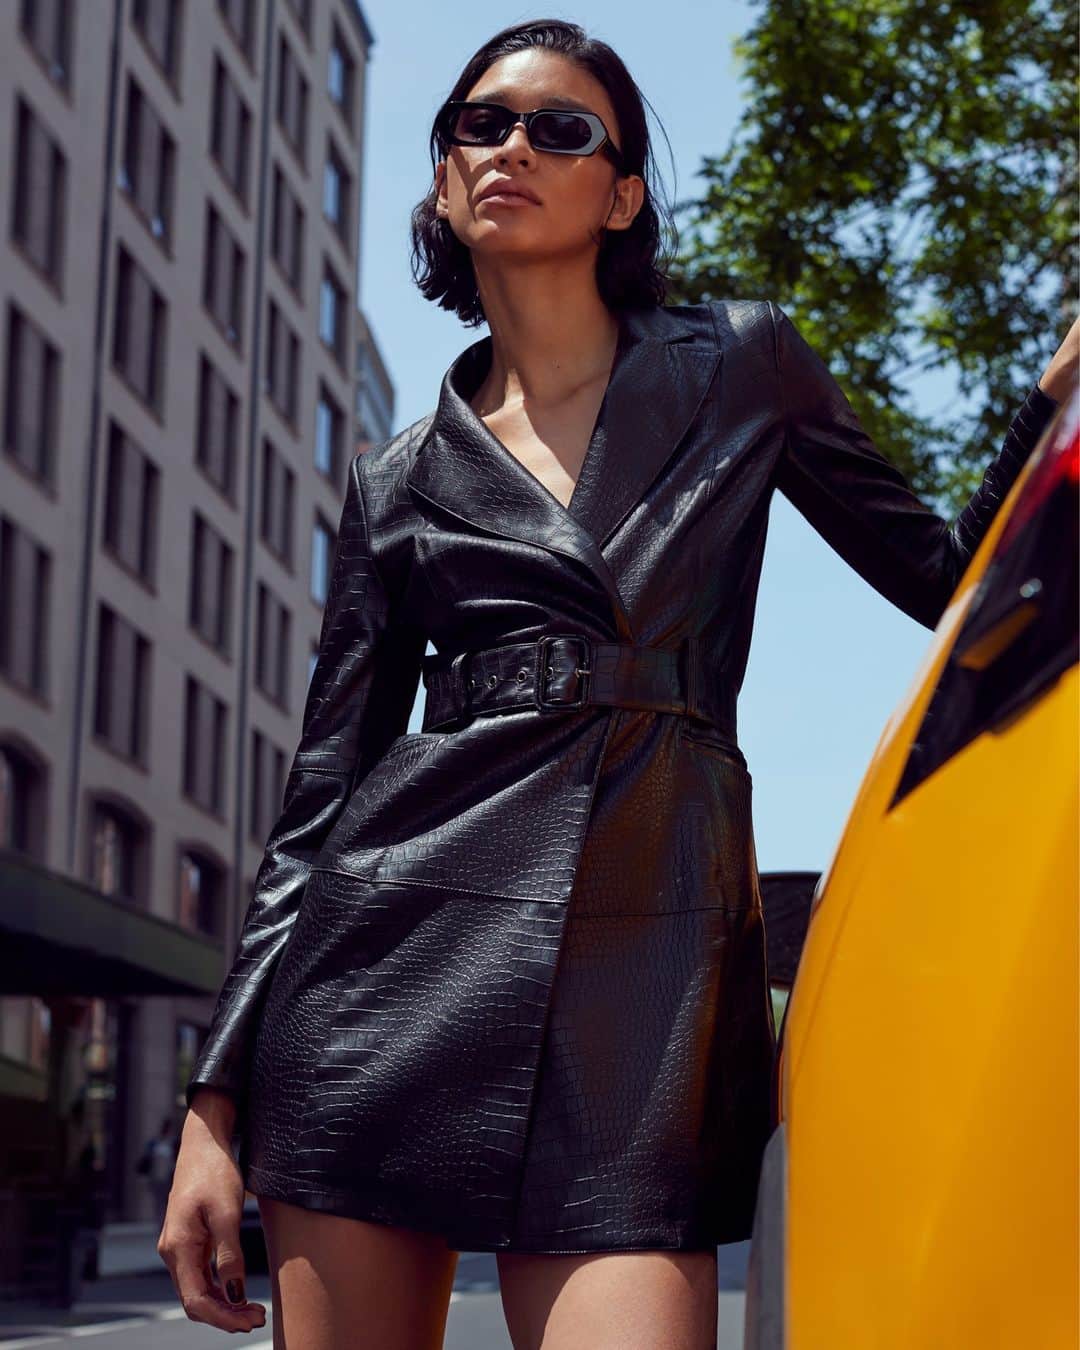 Bloomingdale'sのインスタグラム：「Pulling up to Fashion Week like ☝️🖤 🕶️ We’re so ready to kick off a new season of style straight from #NYFW! New looks. New trends. New brands. New everything! We seriously can't wait to share it with all of you this month. Stay tuned!」